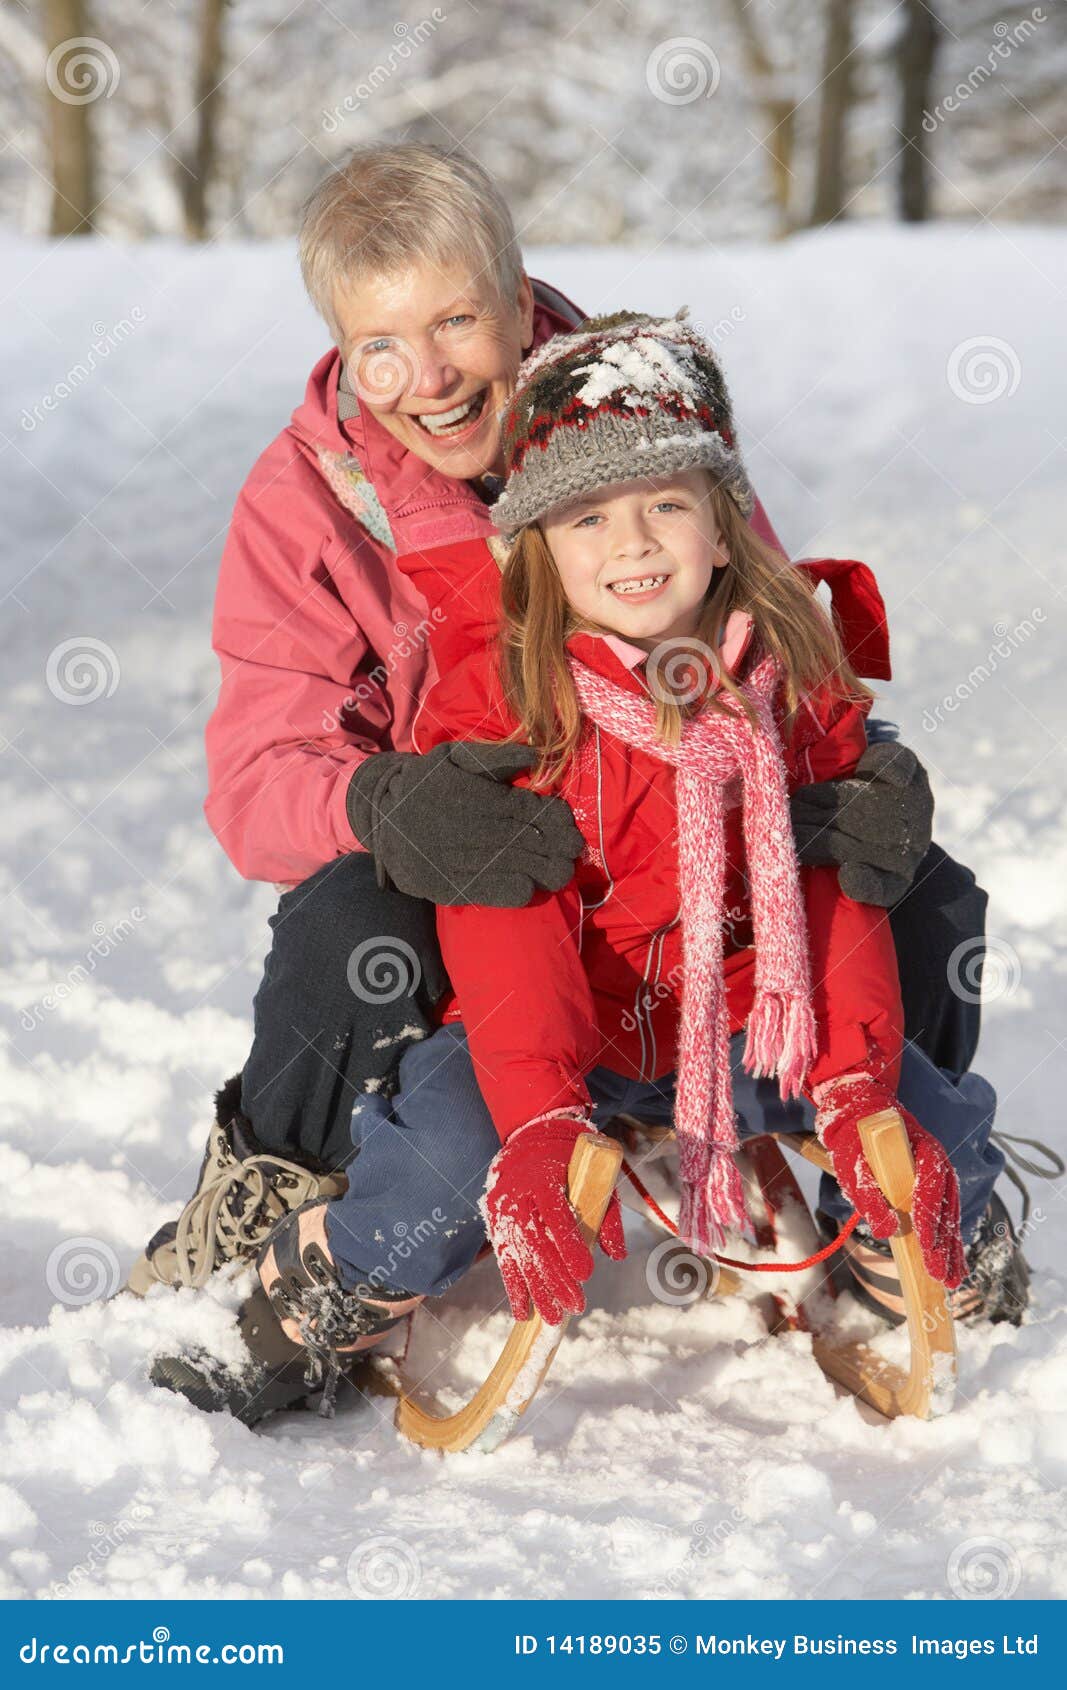 young girl with grandmother riding on sledge